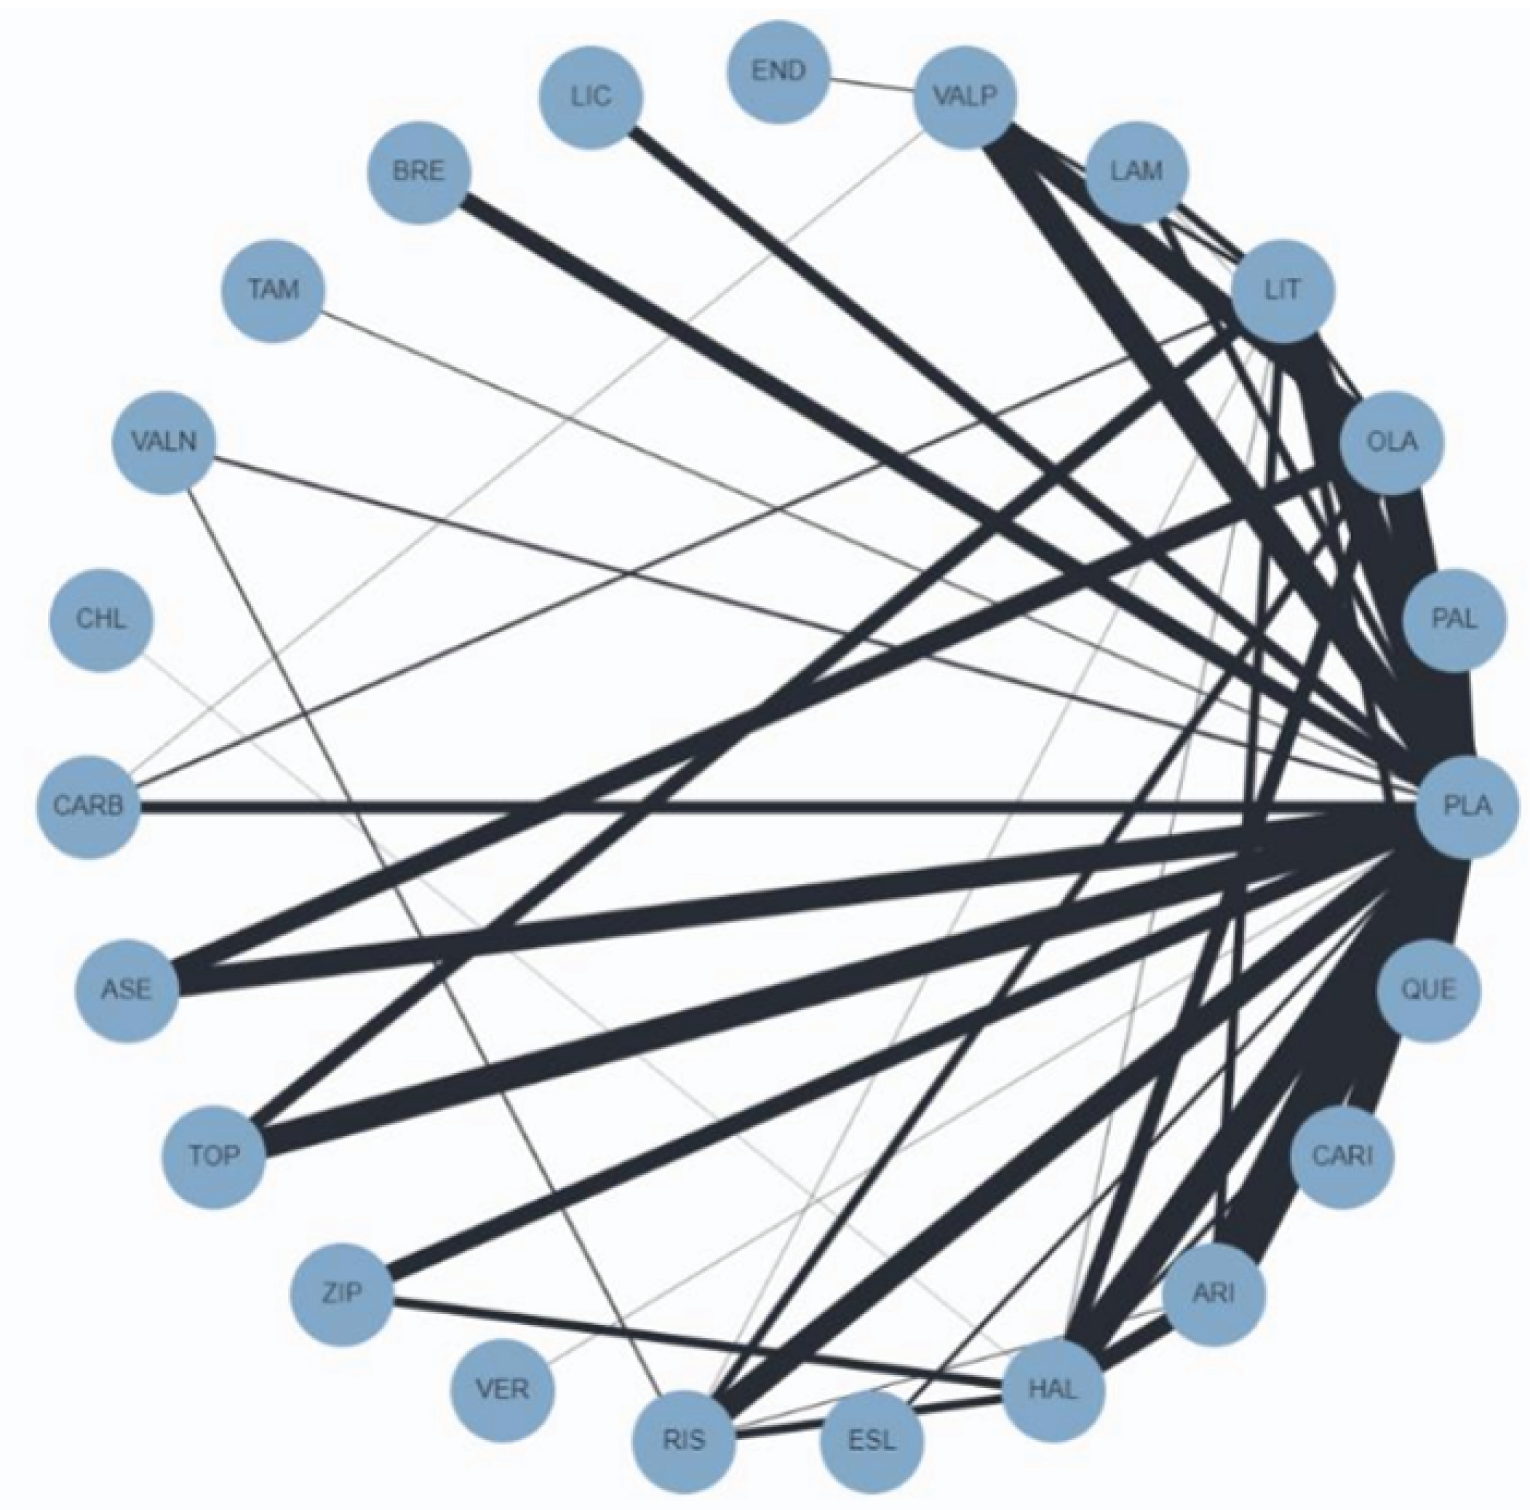 This is an image of the evidence network for all-cause discontinuation in the network meta-analysis published by Kishi et al. (2021). Cariprazine is indirectly connected to comparators through the placebo node.